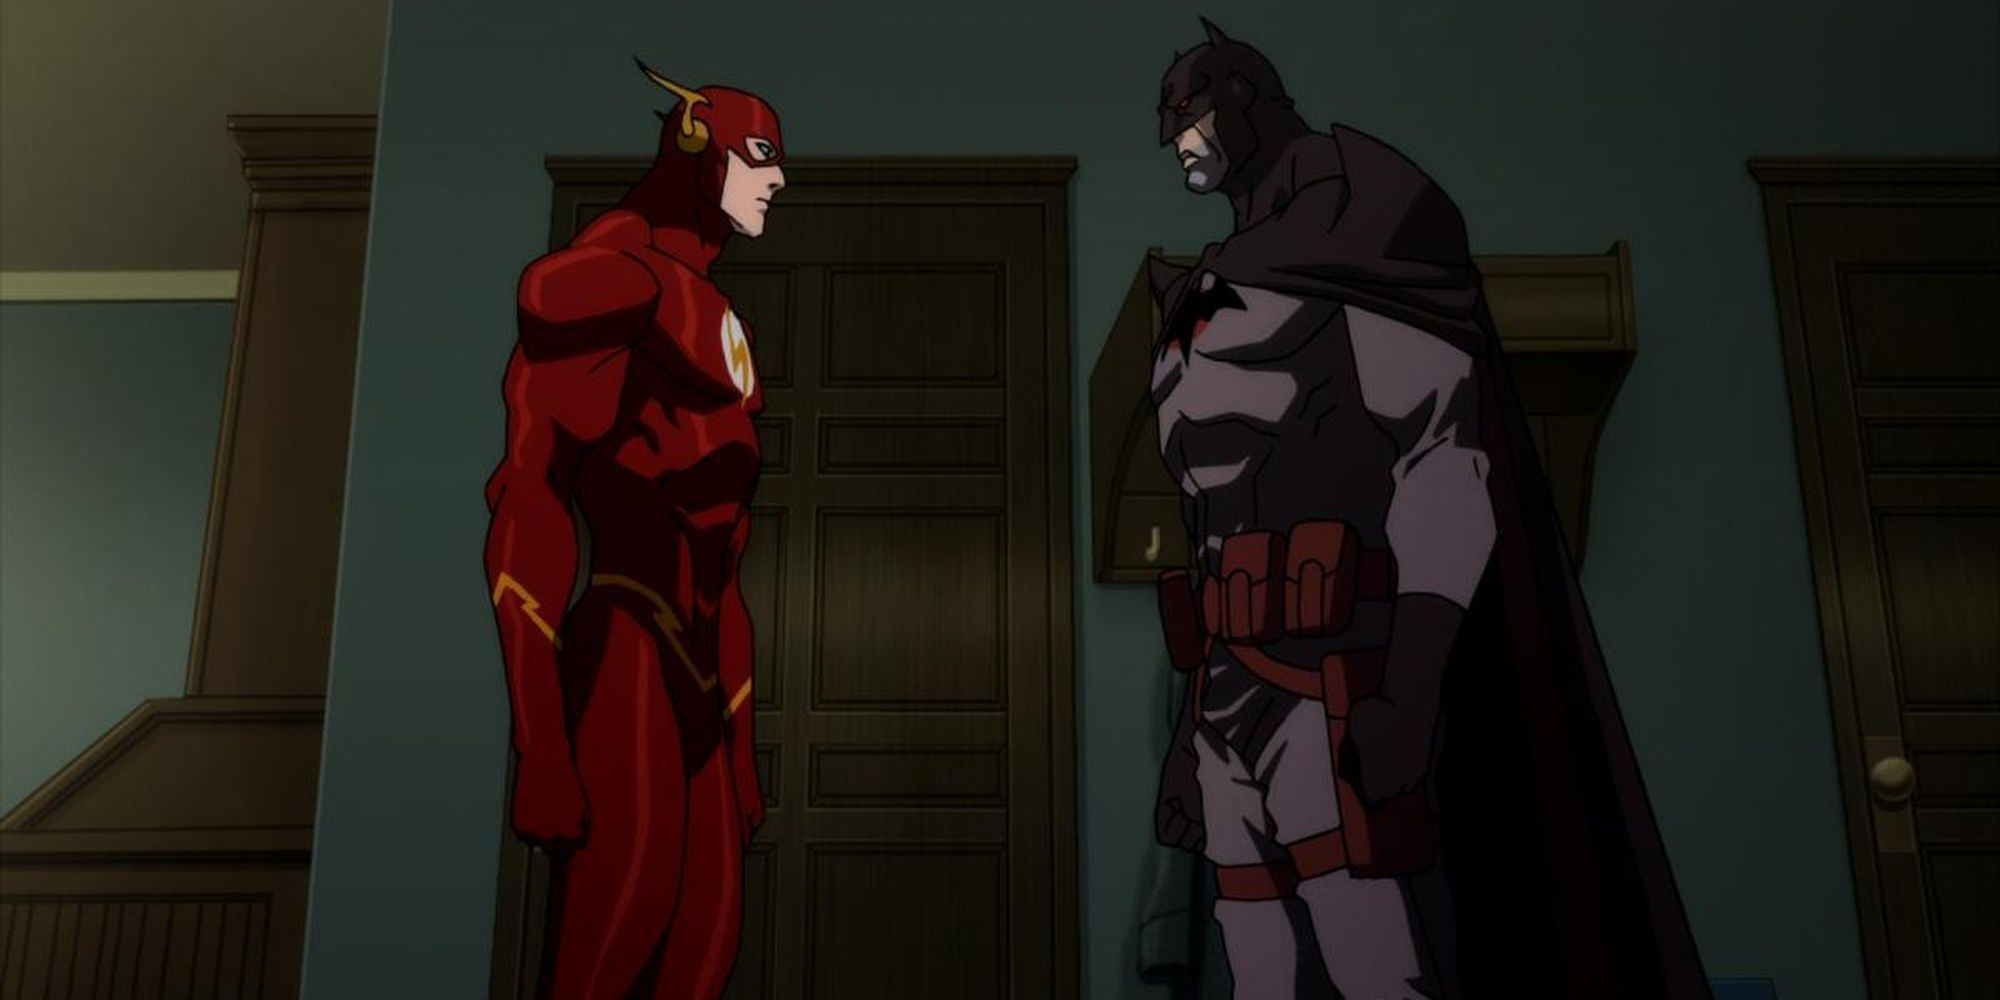 Justin Chambers as The Flash facing Kevin McKidd as Batman (Thomas Wayne) in 'Justice League: The Flashpoint Paradox'